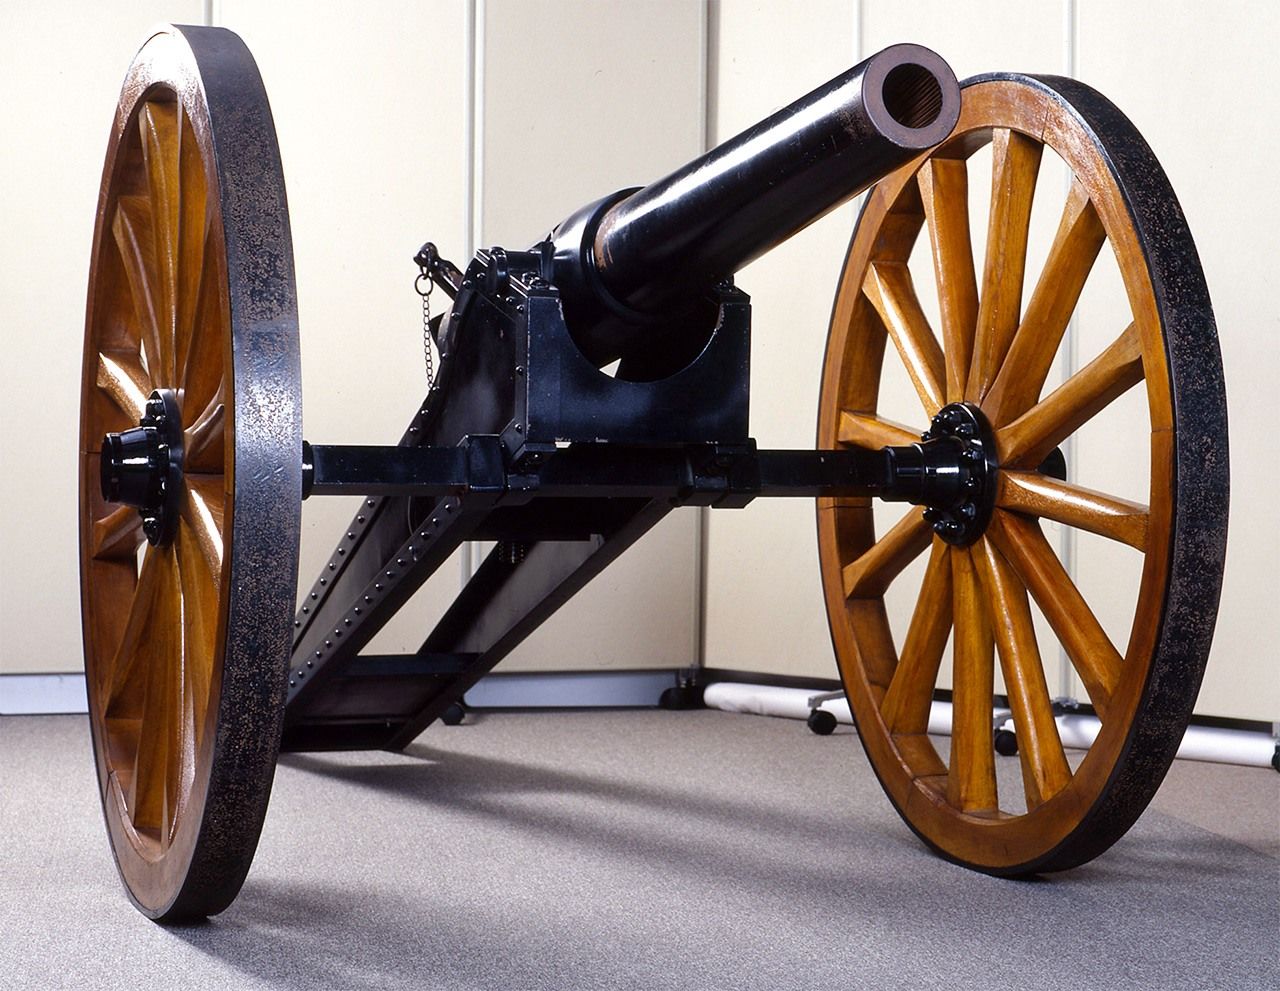 A replica of an Armstrong gun stands at the Saga Castle History Museum in Saga Prefecture. (Courtesy of the Saga Castle History Museum)